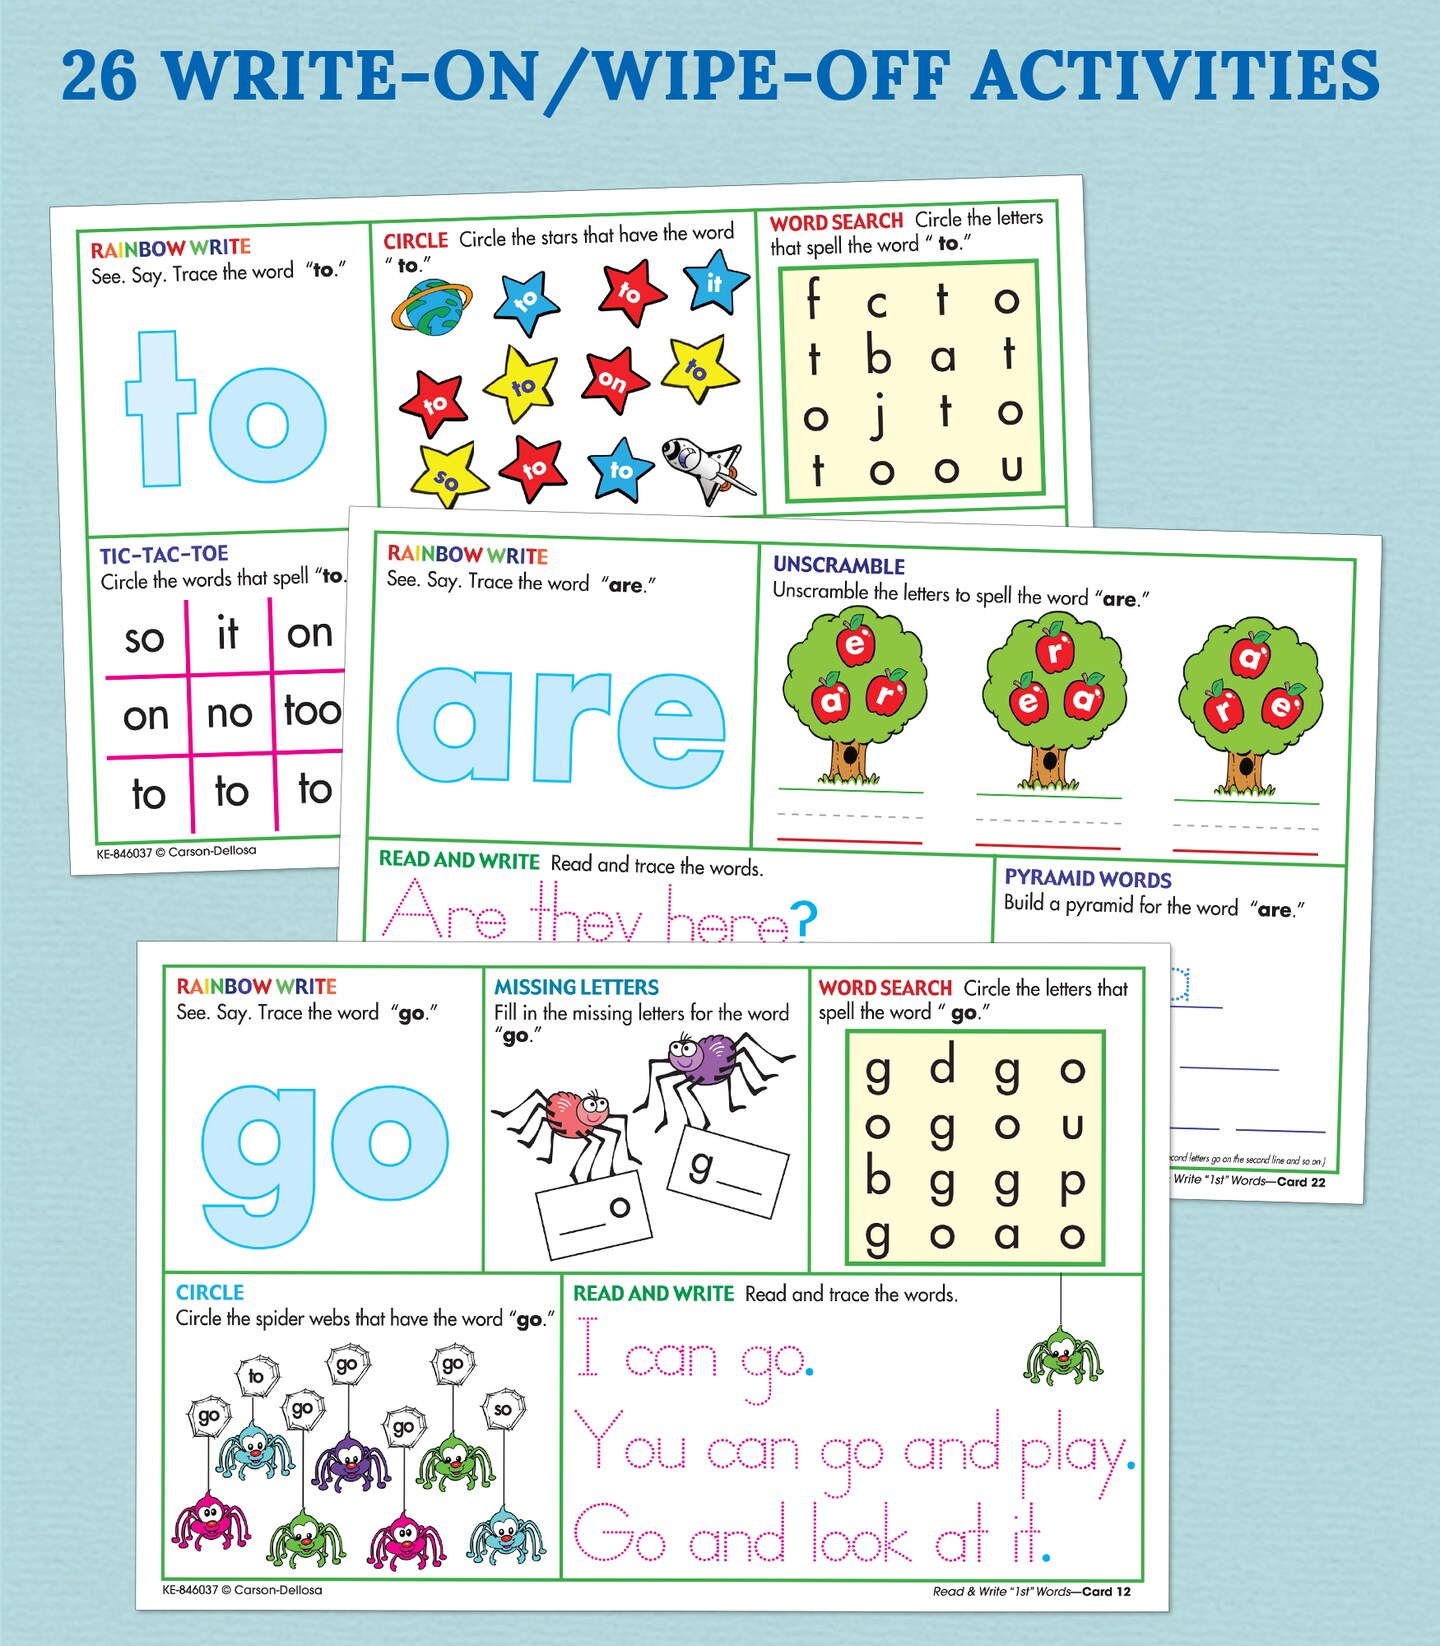 Key Education Write-On, Wipe-Off Read and Write &#x22;1st&#x22; Words Activity Kit, Multisensory Reading and Writing Practice With Reusable Dry Erase Boards and Crayons, Ages 4+